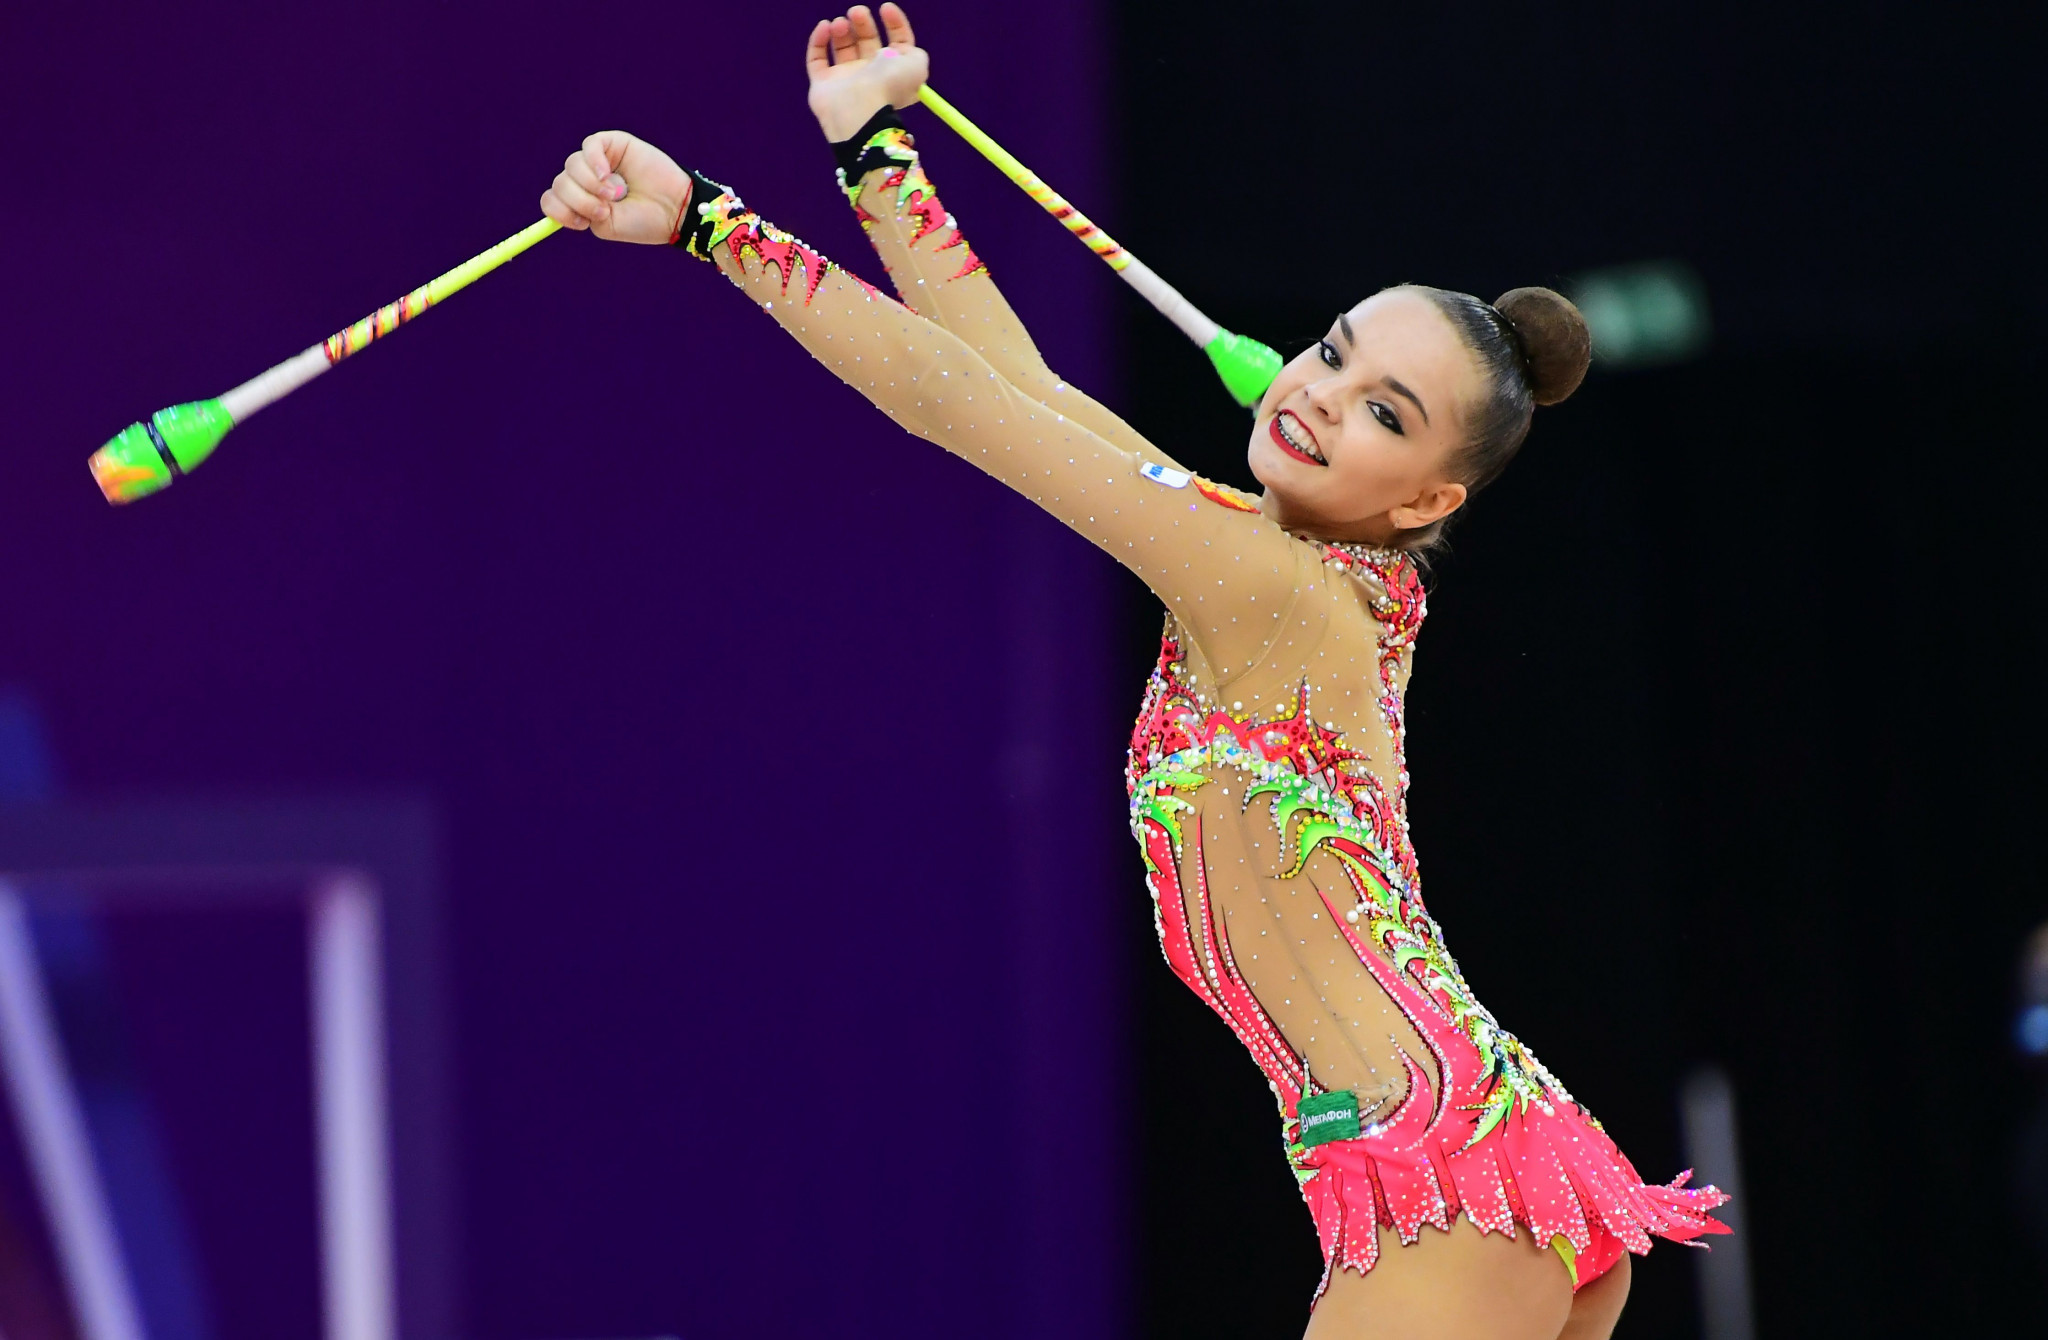 Averina twins dominate FIG Rhythmic World Championships for a second day